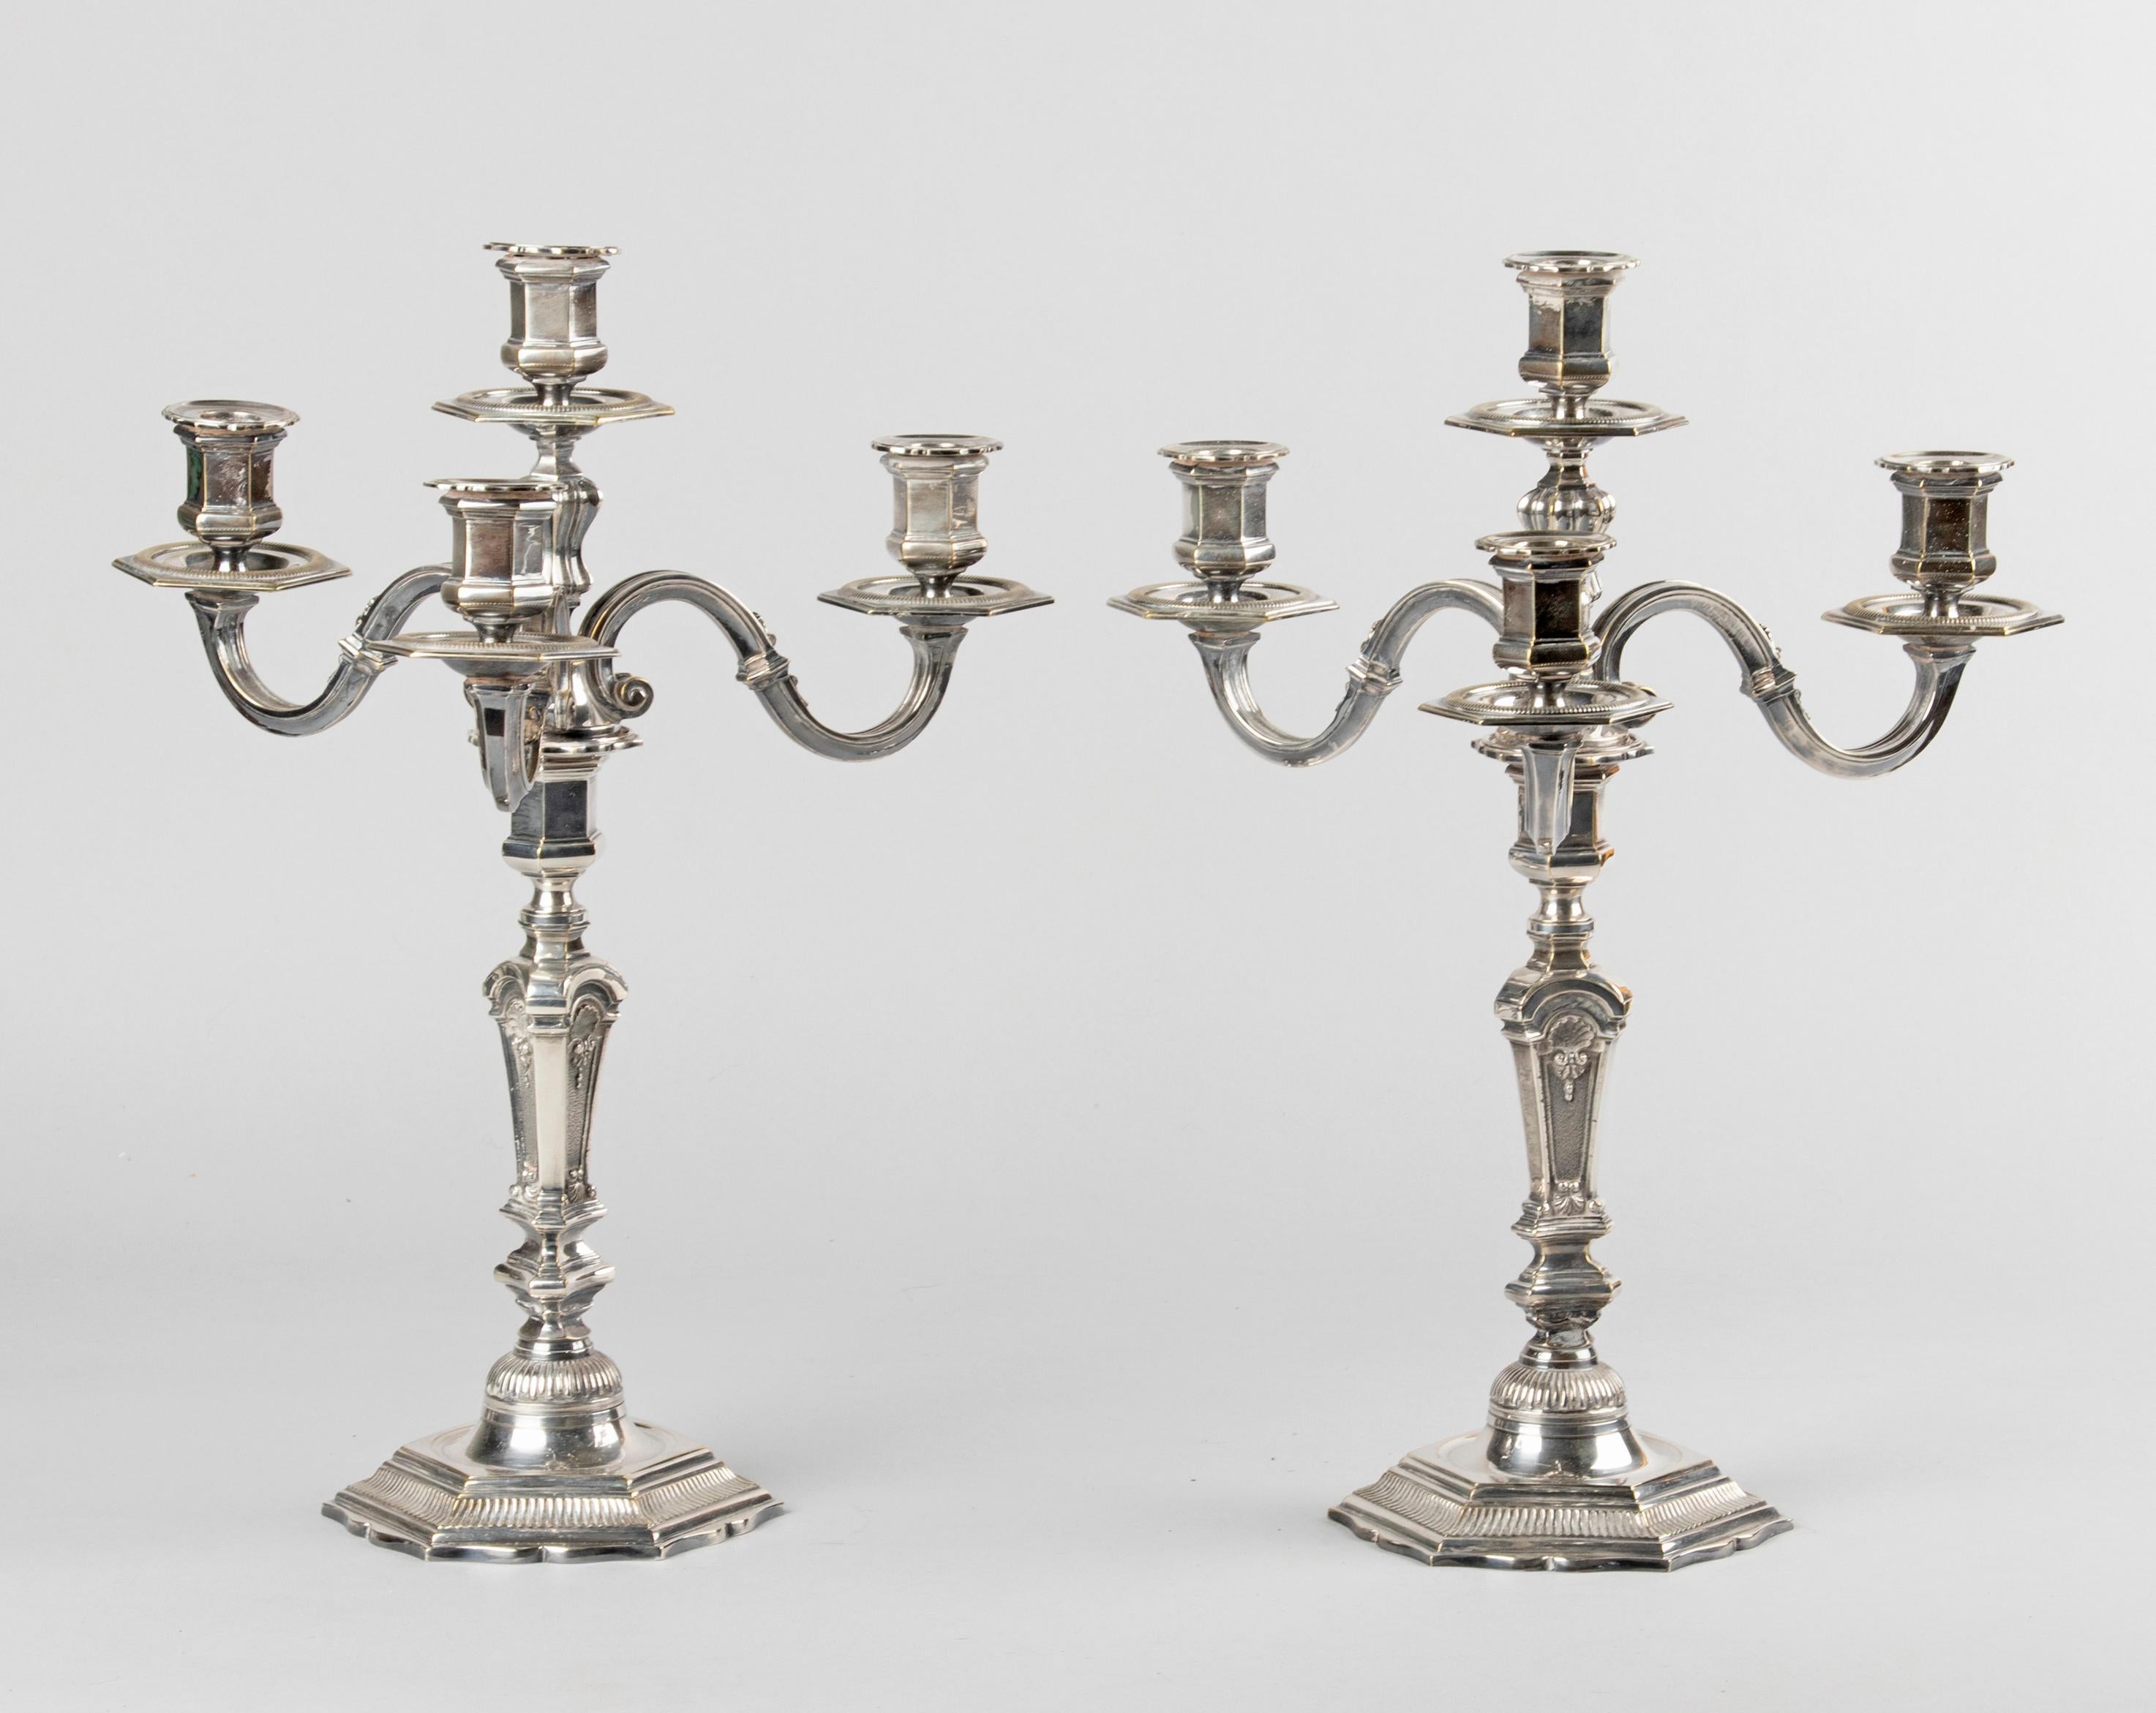 Hand-Crafted Early 20th Century French Regency-Style Silver Plated Candelabras